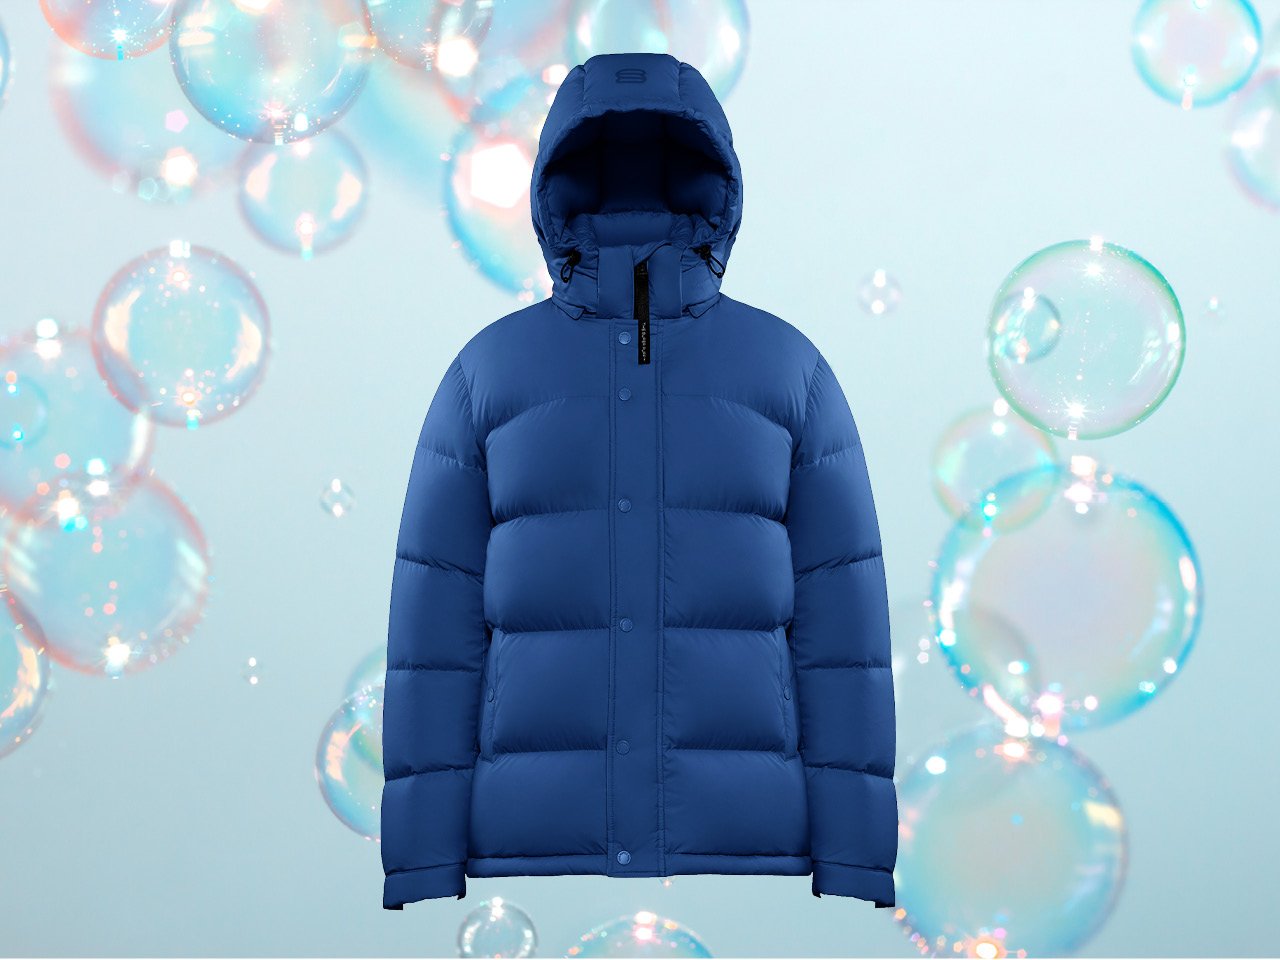 A blue puffer jacket against a blue sudsy background for an article on how to wash your puffer jacket at home.